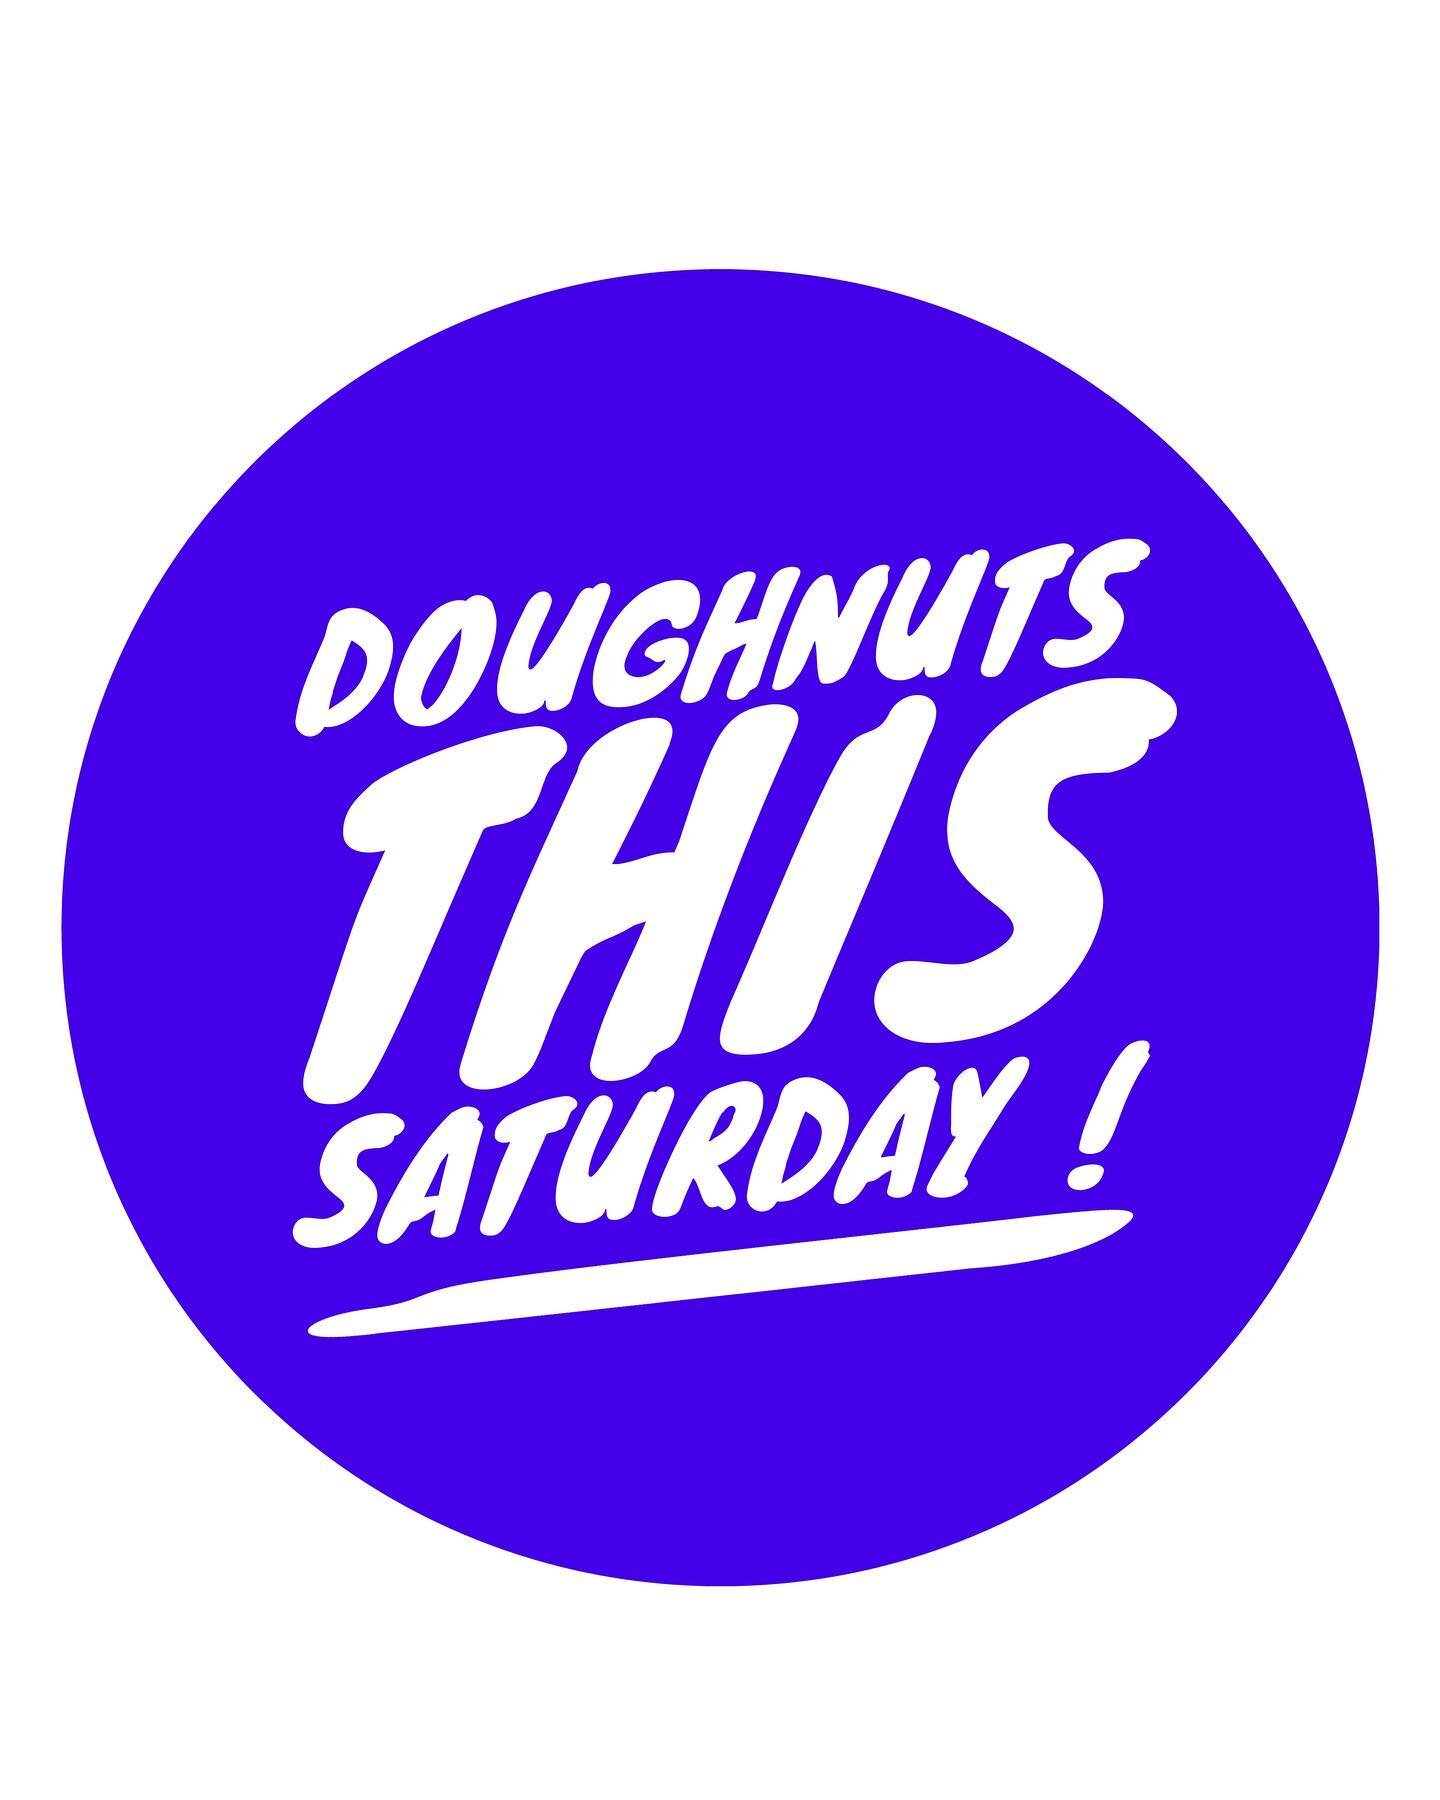 JOIN US ON MAIN RD FOR THE LAST FARMERS MARKET OF THE SEASON ! 
9am until sold out.
YES WE ARE BRINGING DOUGHNUTS AND A BON FIRE